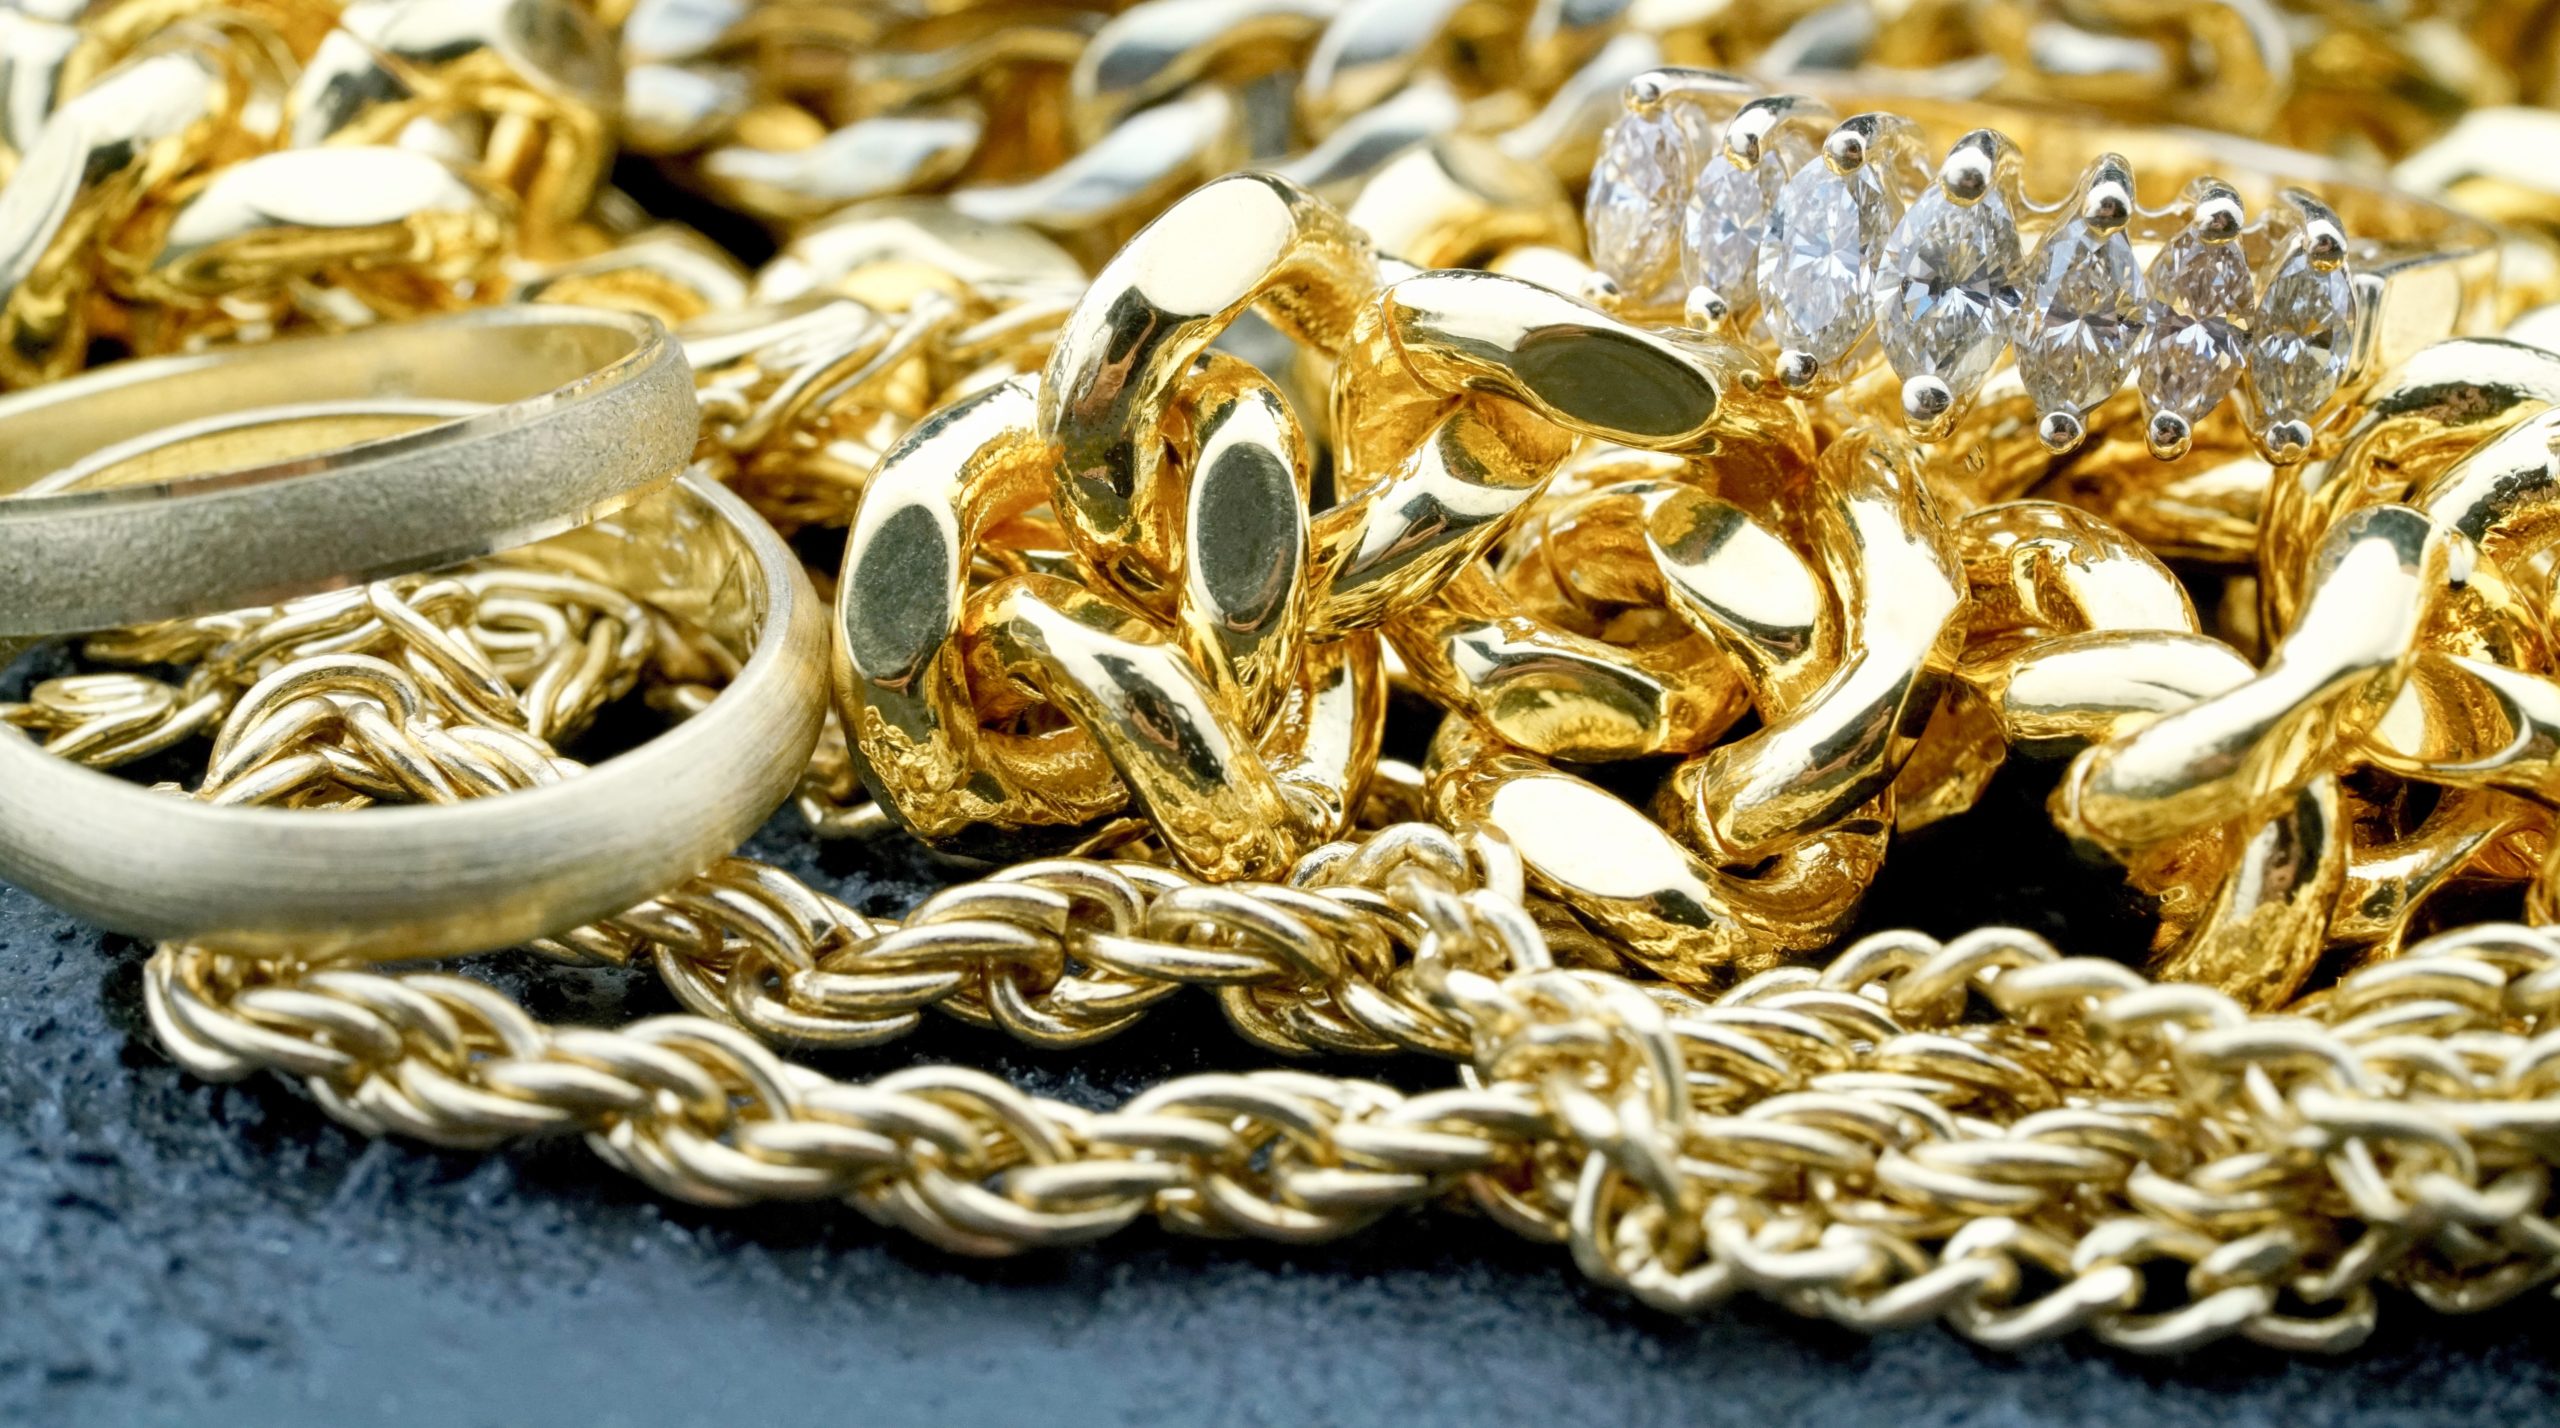 A Pile Of Gold Jewelry